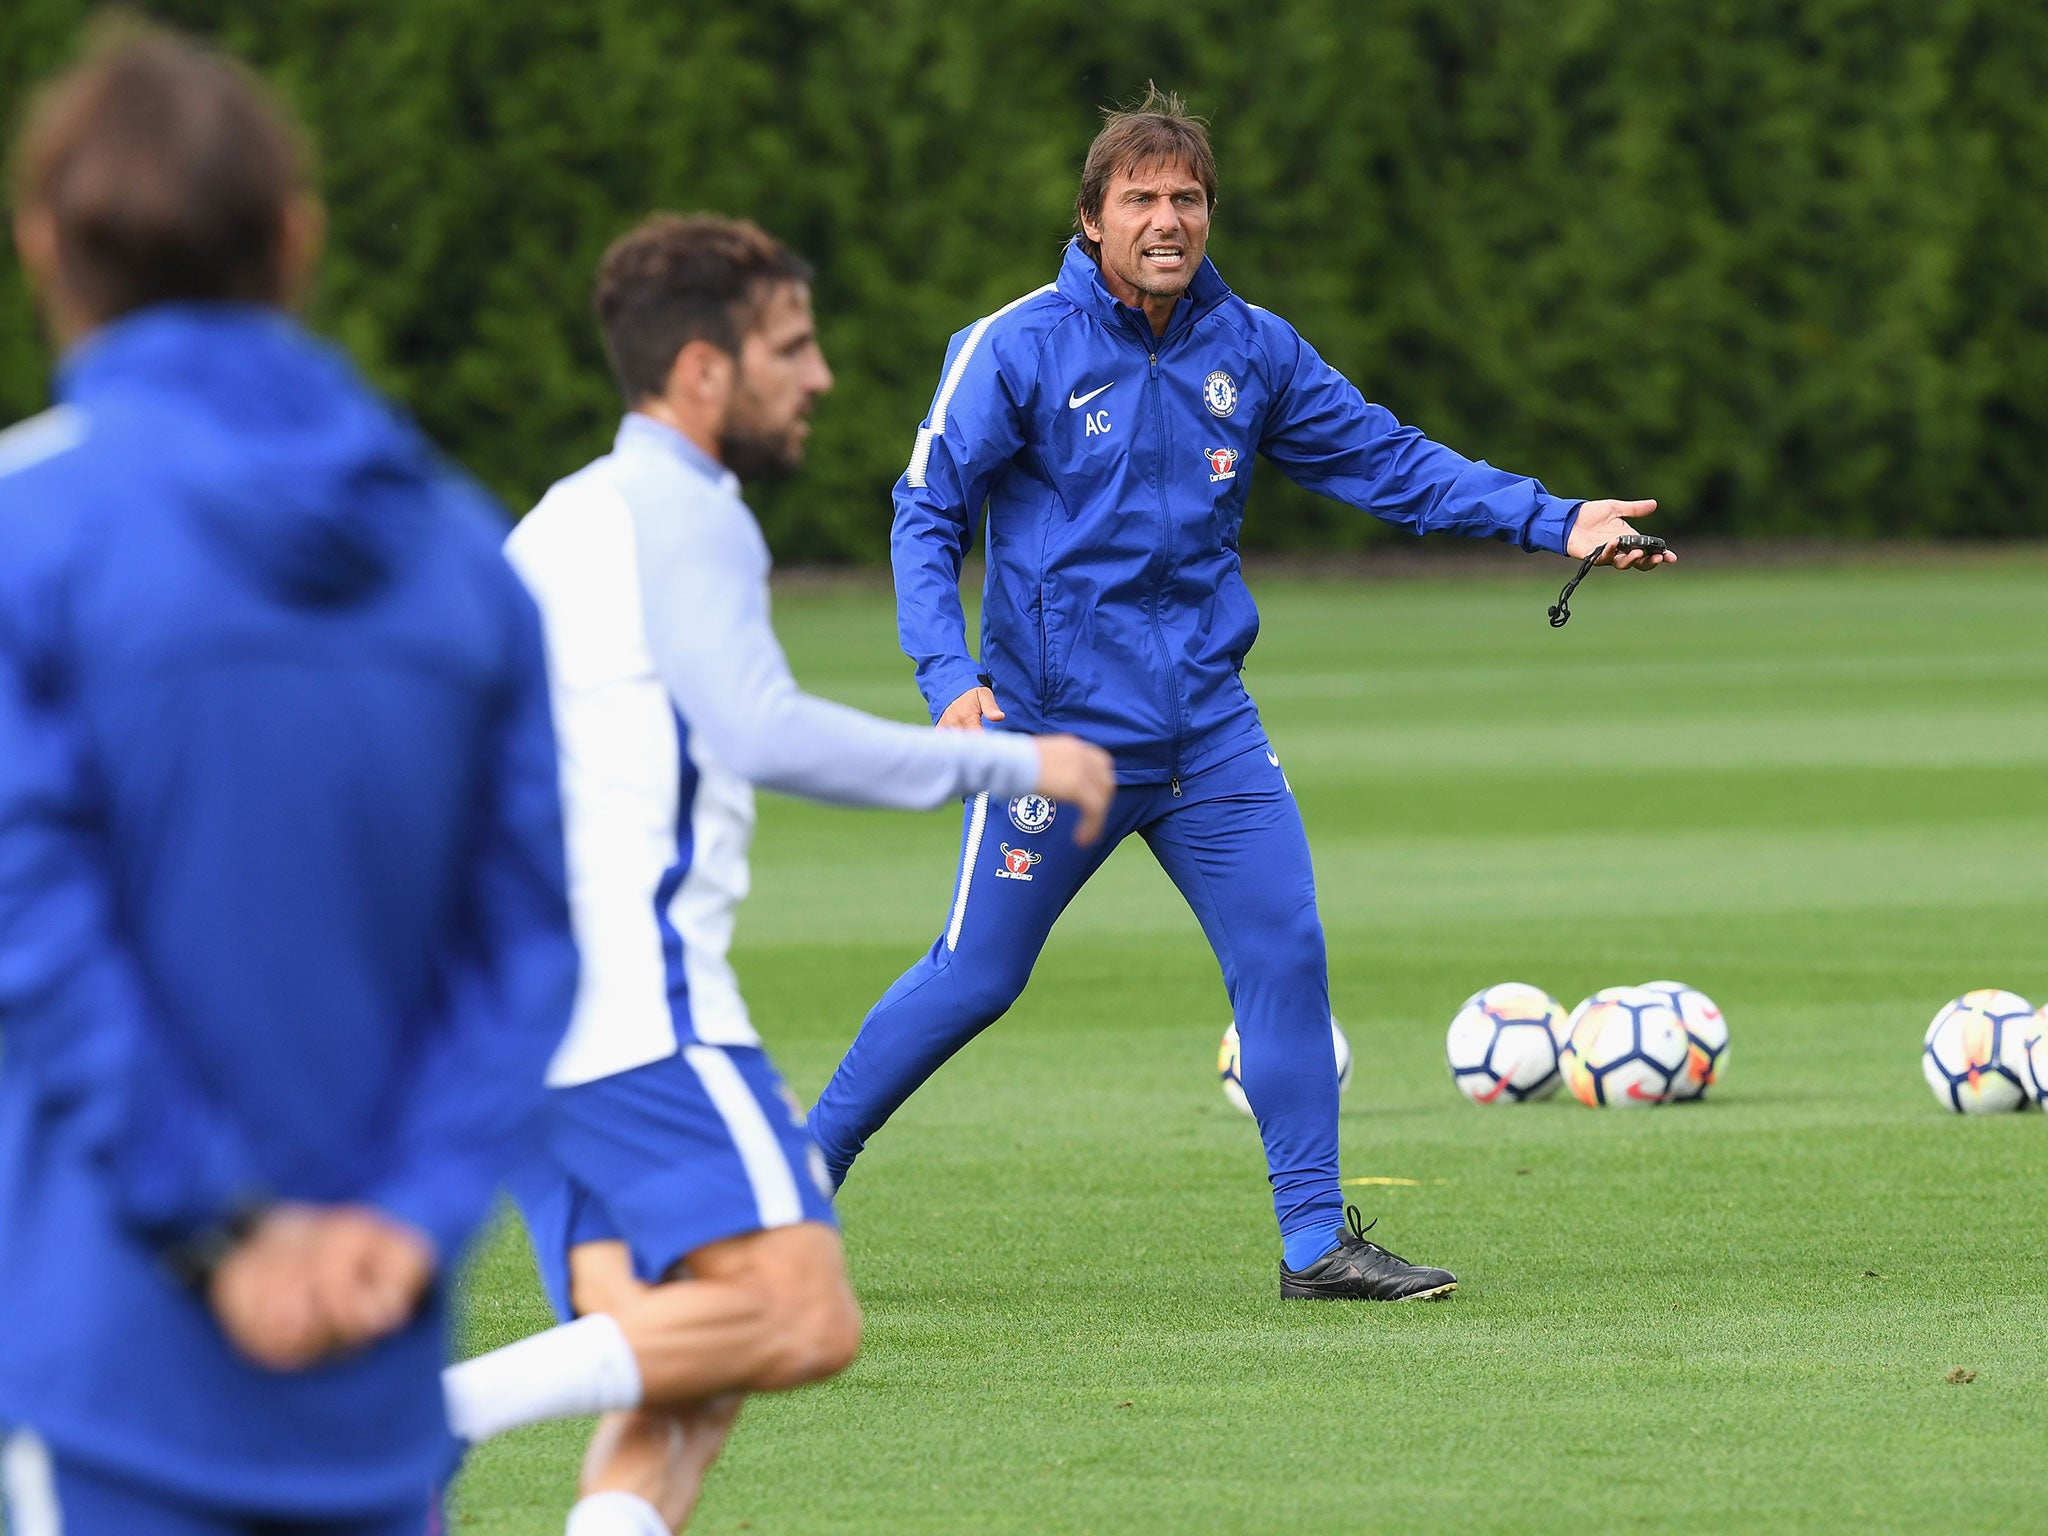 Antonio Conte in training ahead of his side's clash with Leicester this weekend